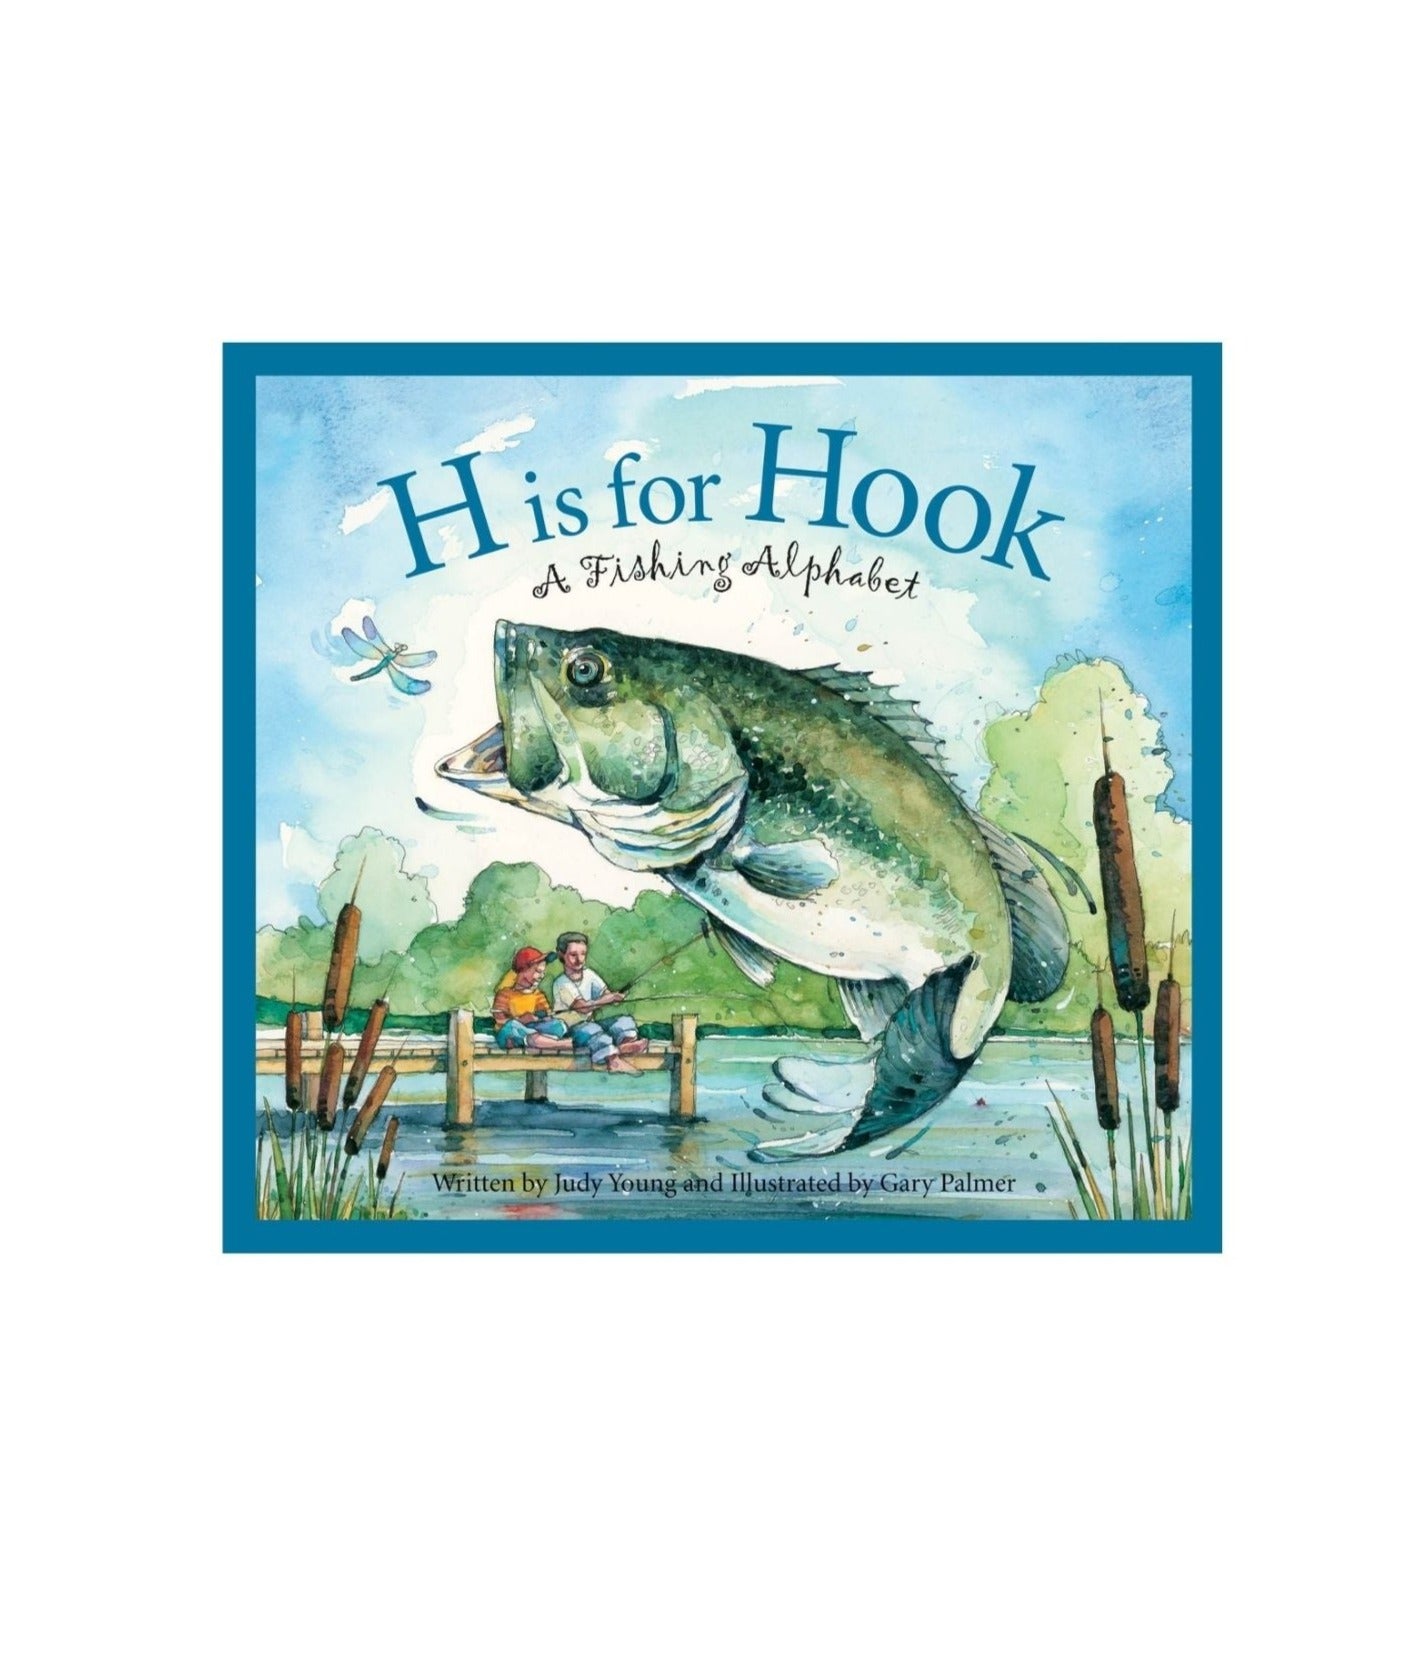 H is for Hook book cover